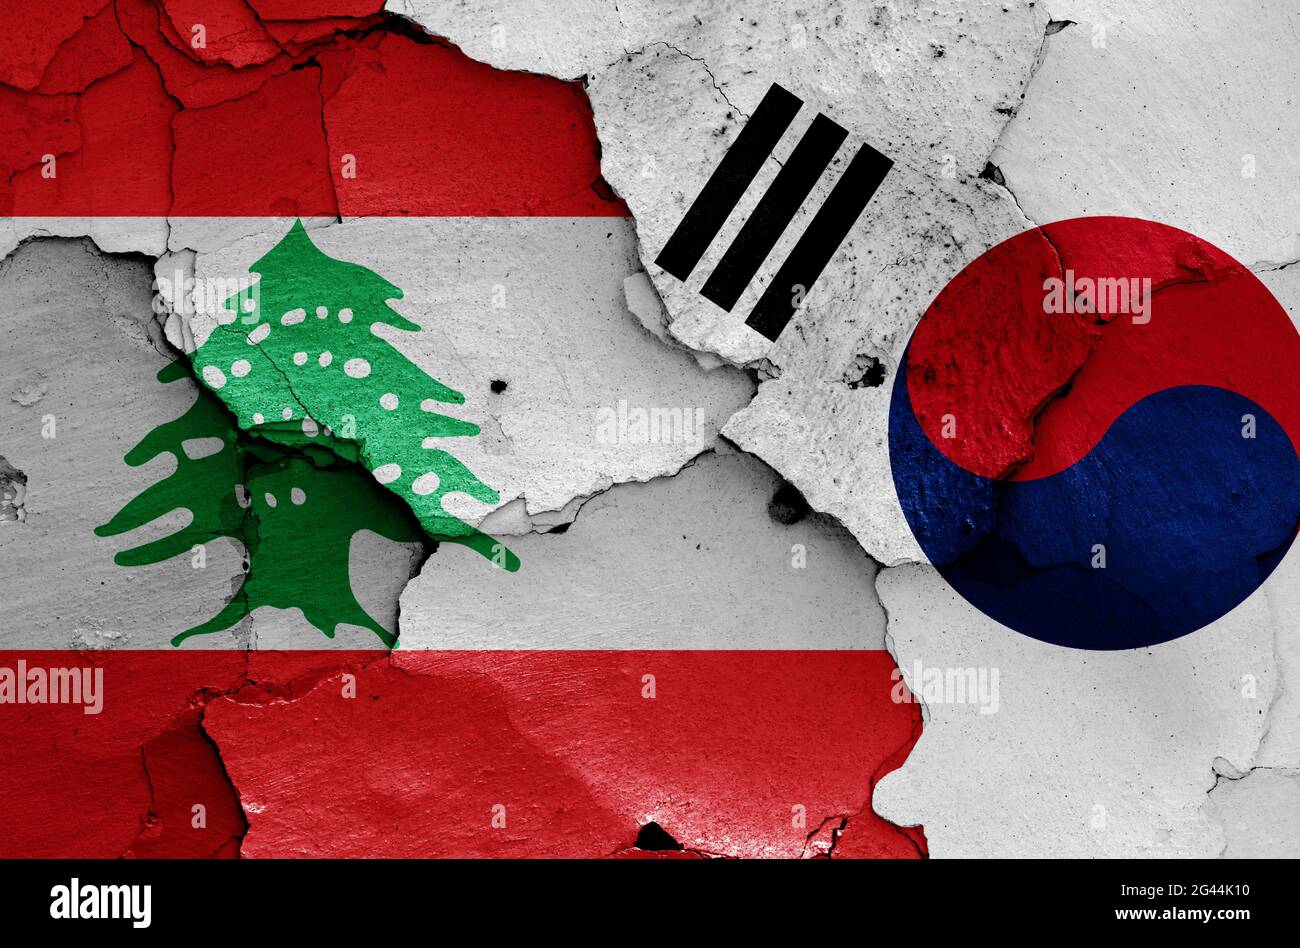 Flags of Lebanon and South Korea painted on cracked wall Stock Photo